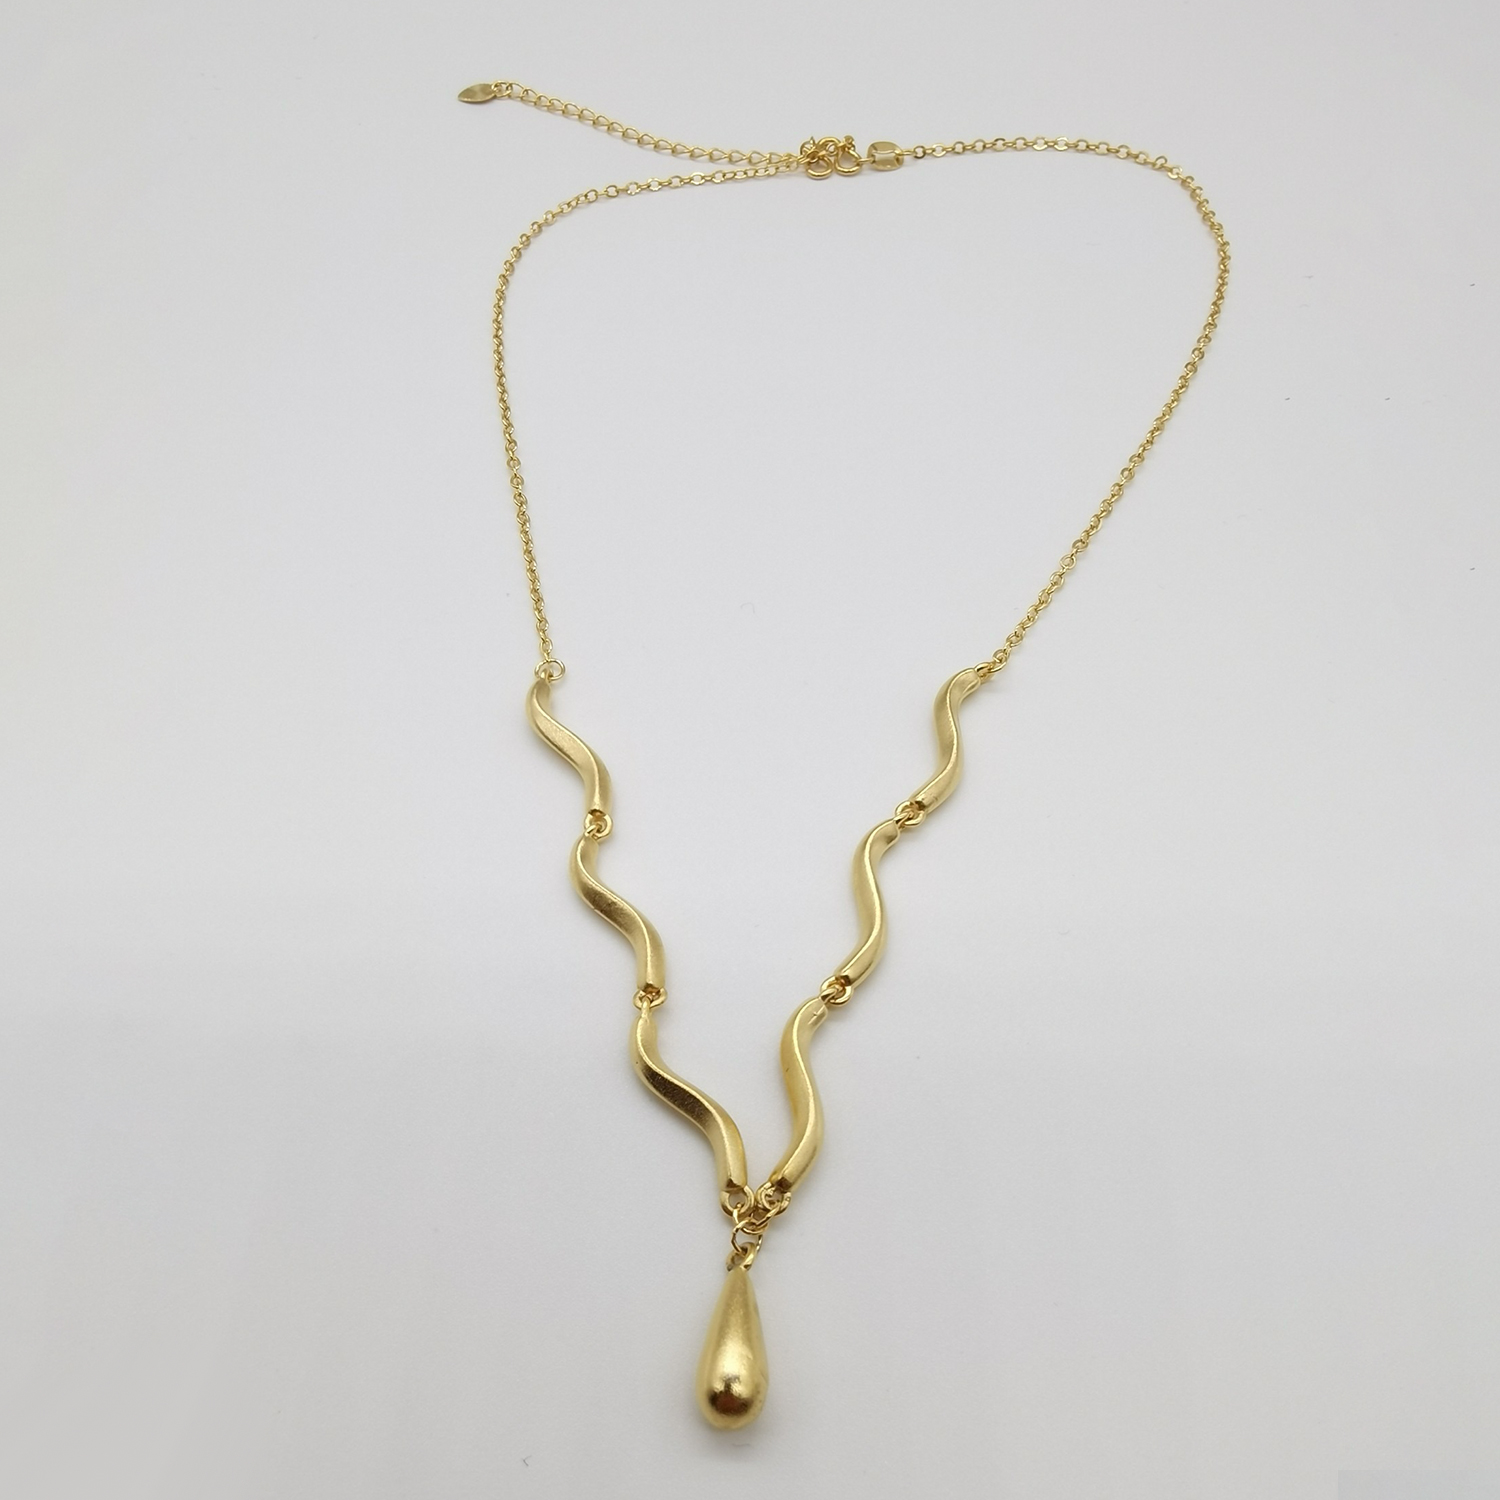 Alluvial gold vacuum electroplating 24K gold water drop necklace